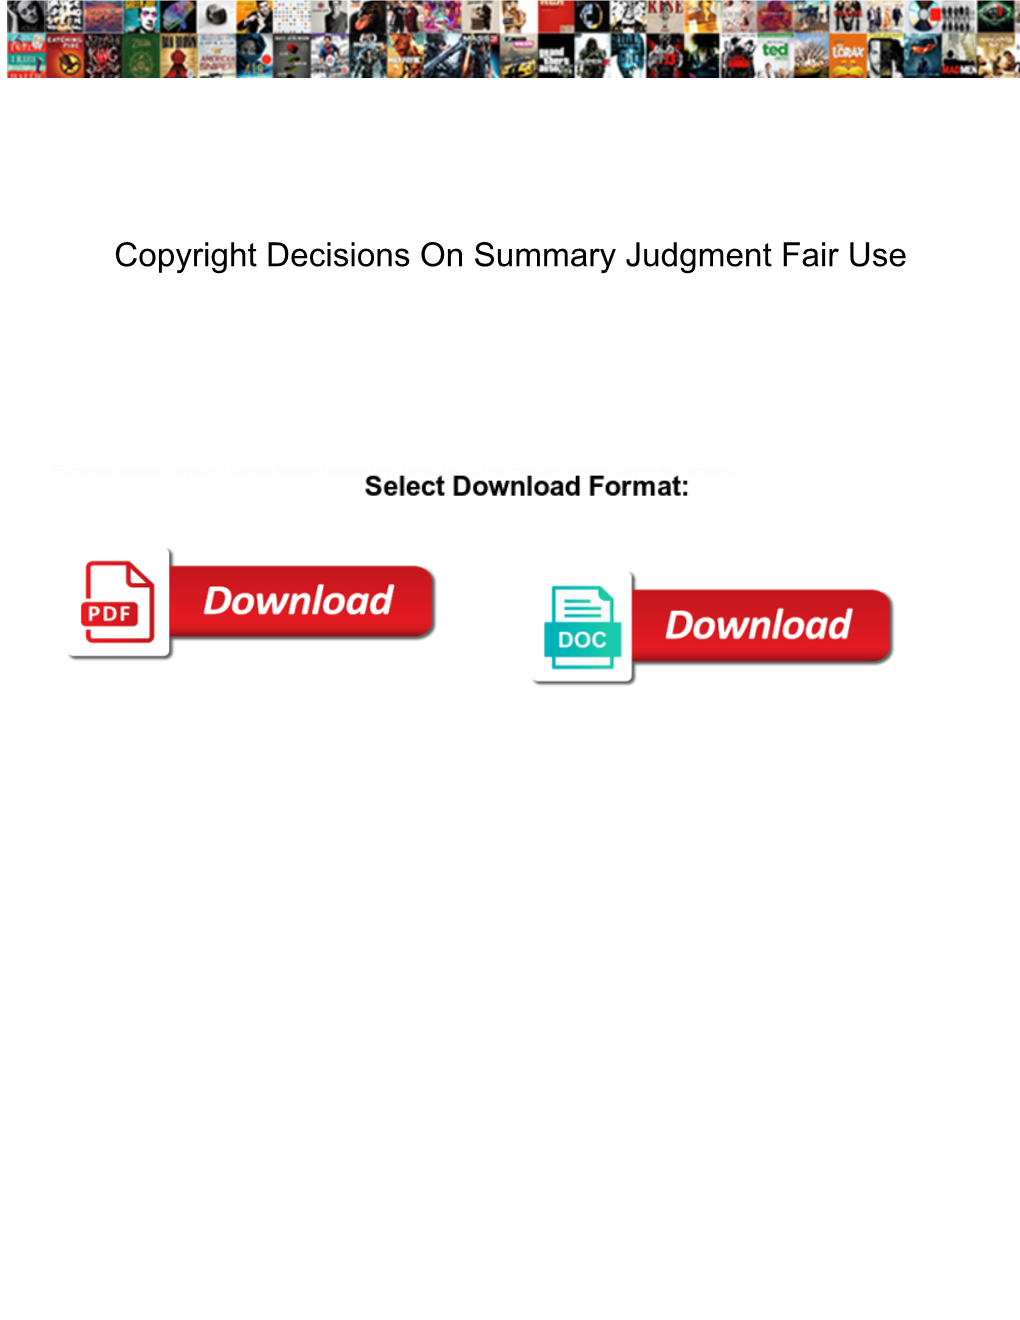 Copyright Decisions on Summary Judgment Fair Use